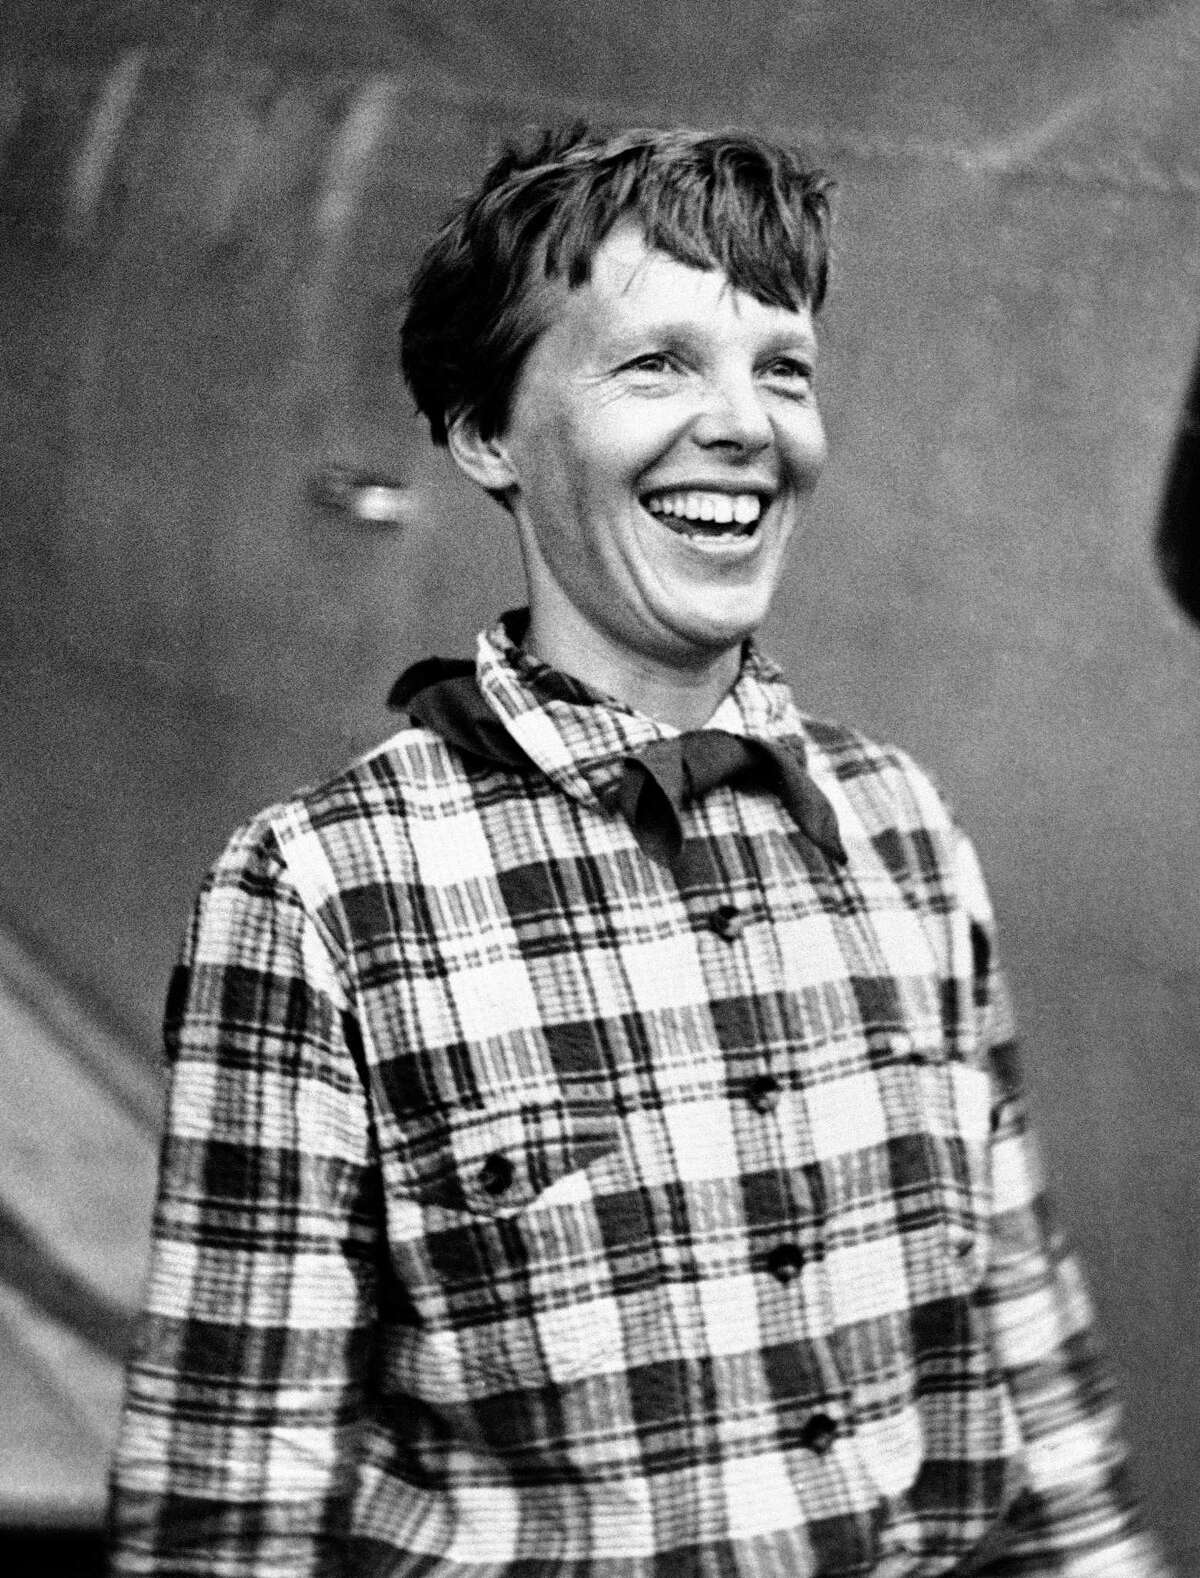 In this June 6, 1937, file photo, Amelia Earhart, the American airwoman who was flying round the world, arrived at Port Natal, Brazil, and took off on her 2,240-mile flight across the South Atlantic to Dakar, Africa. A group investigating the mystery of what happened to Amelia Earhart announced on Oct. 22, 2016, that it has uncovered another connection between the pioneering female pilot and a body found 76 years ago on a remote Pacific island.